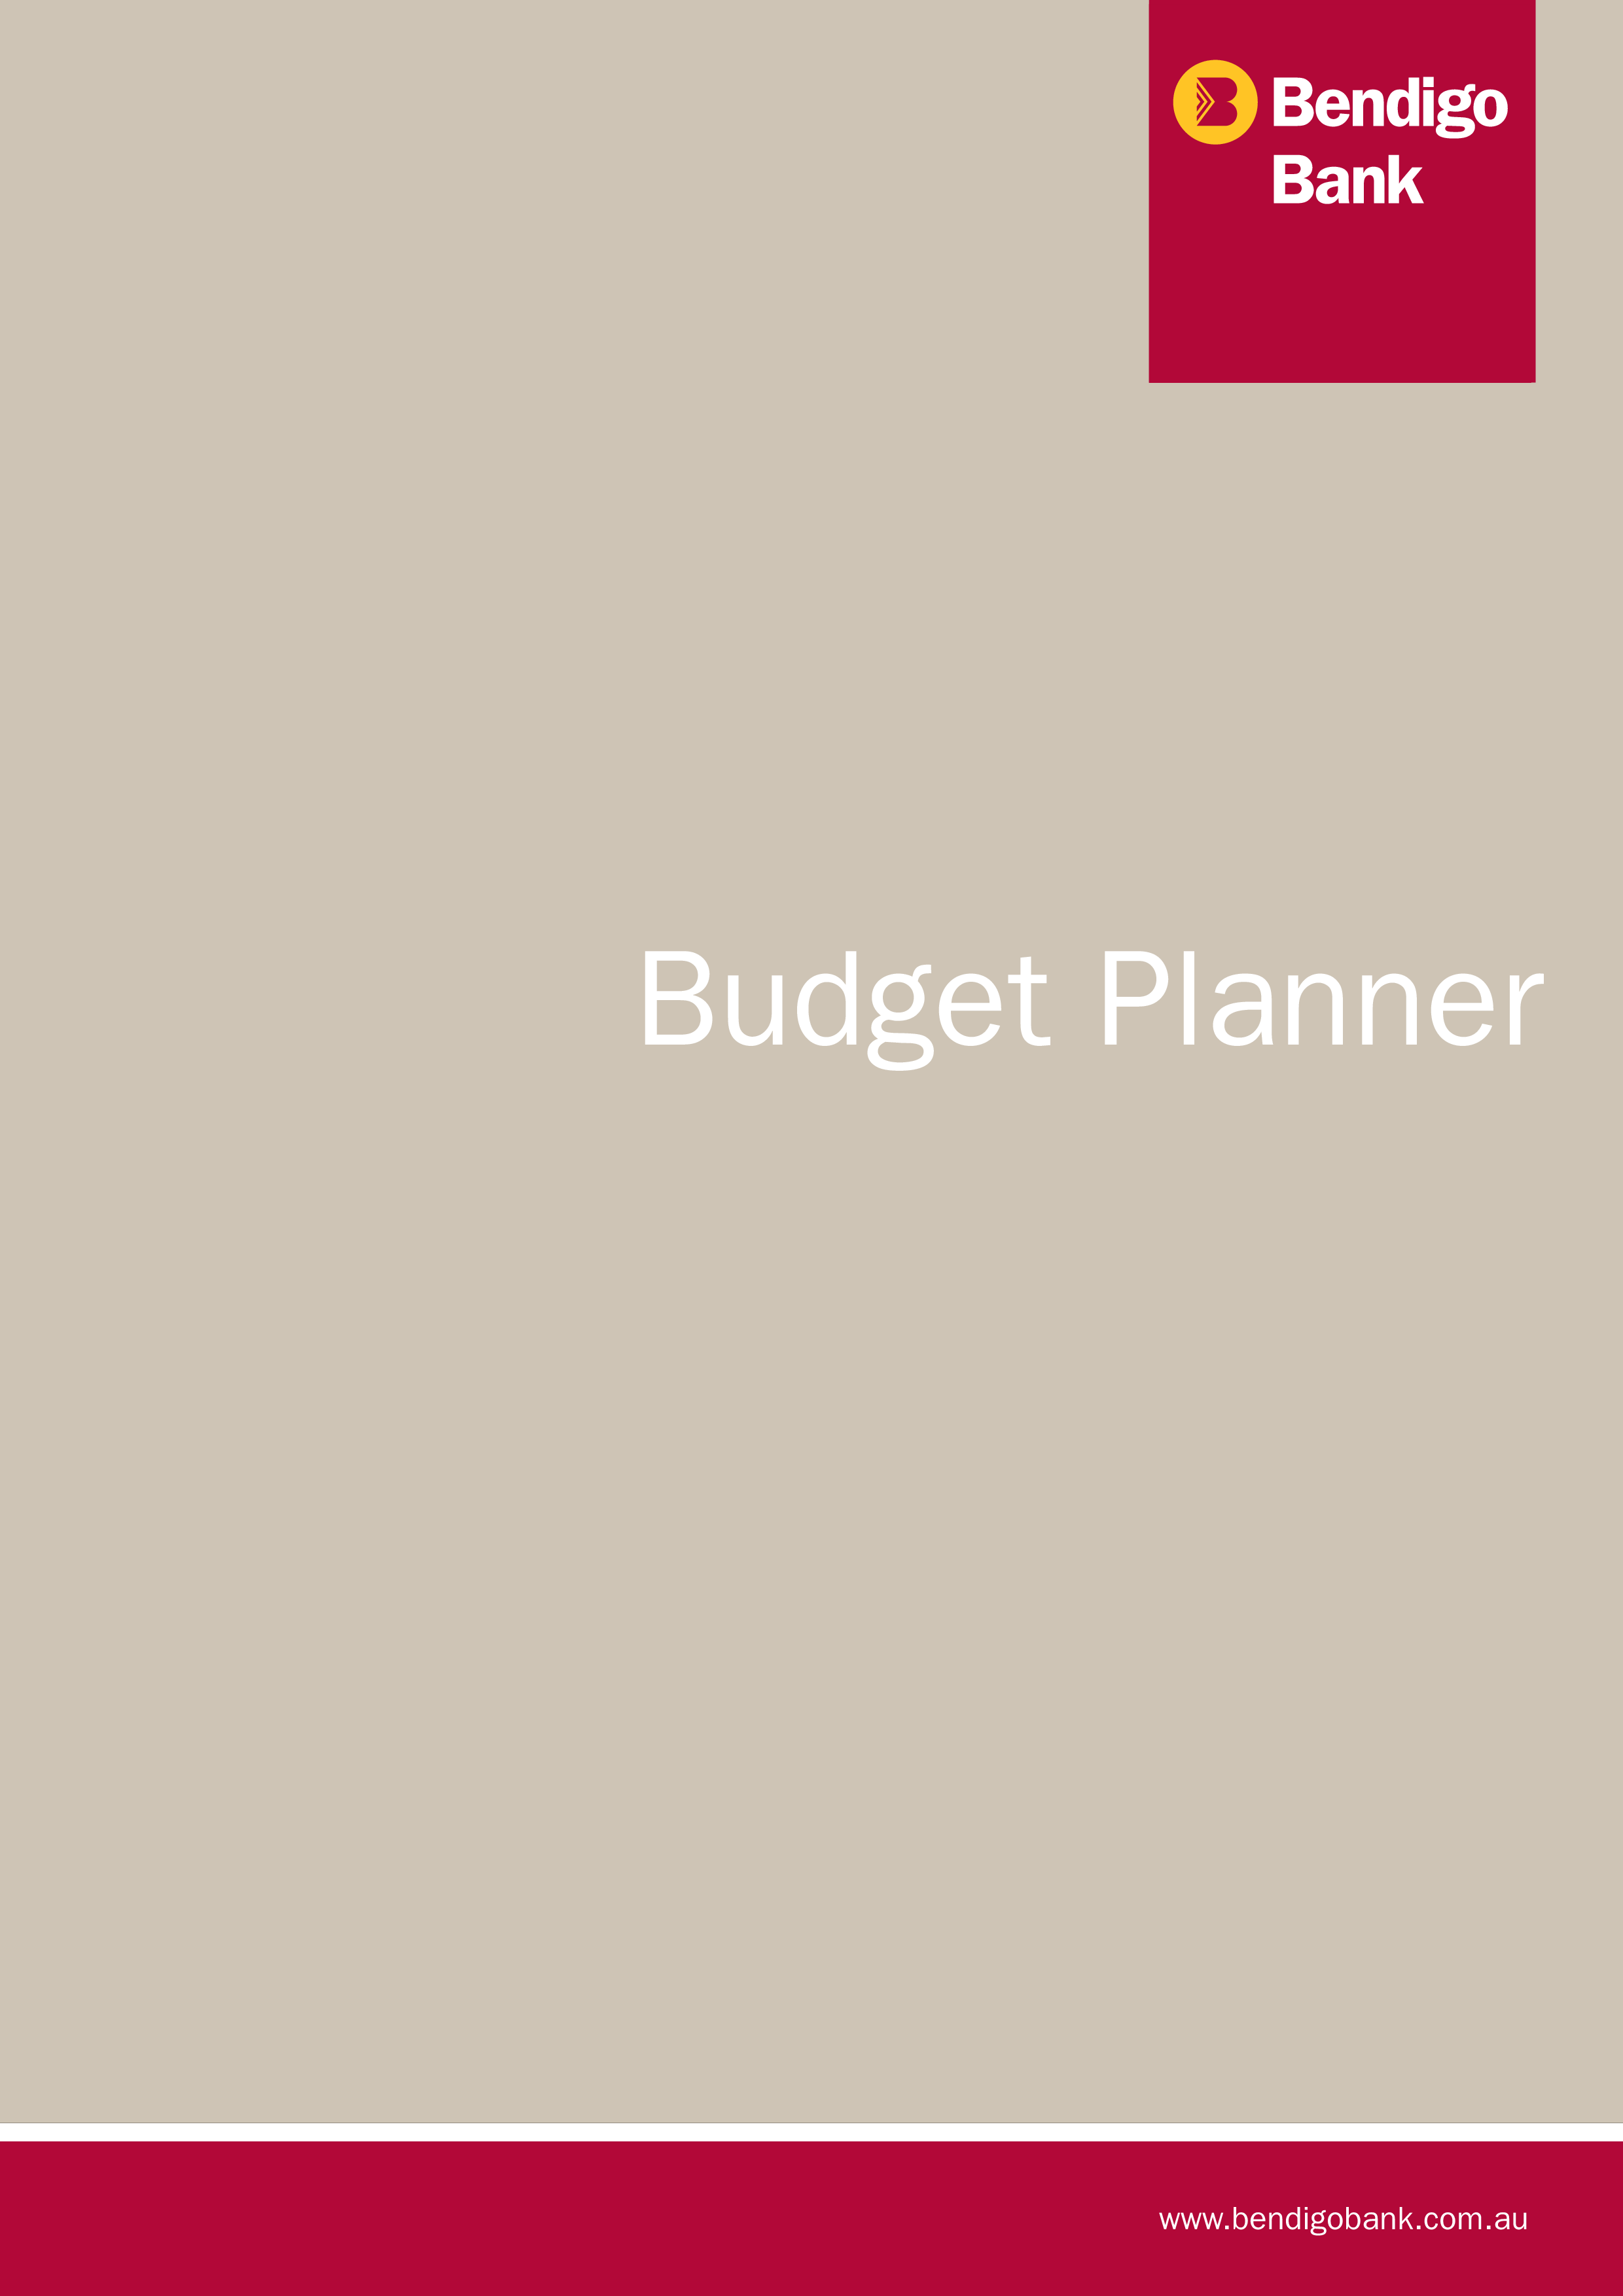 Financial Budget Planner main image